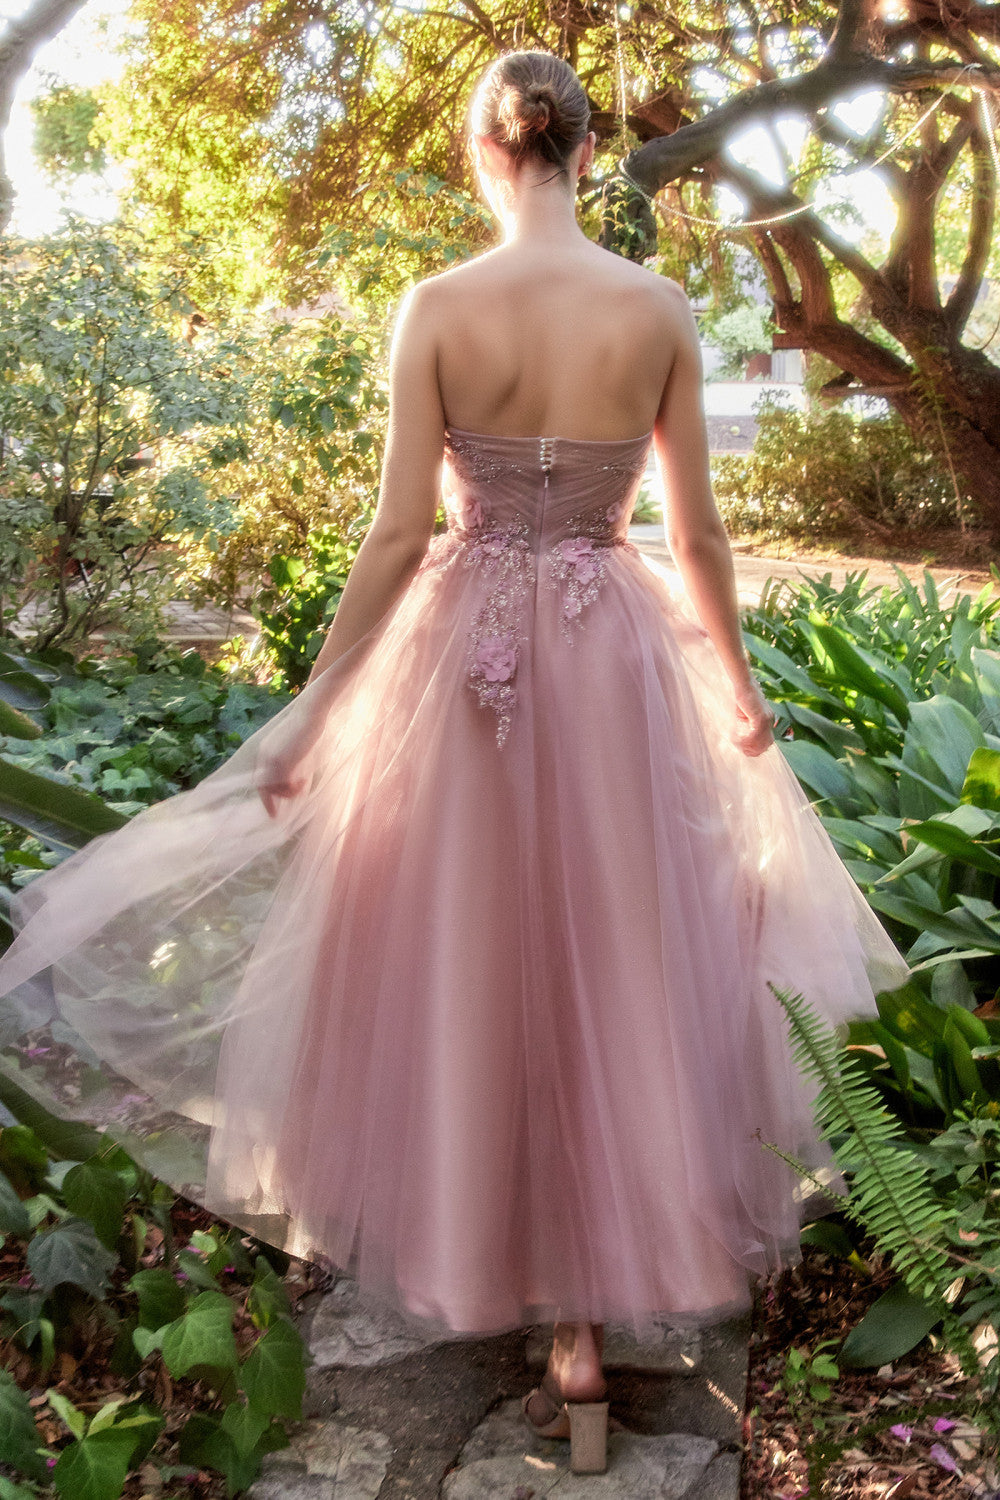 Blush_1 Strapless Sweetheart Tea Length Dress A1195 Penelope Gown - Special Occasion